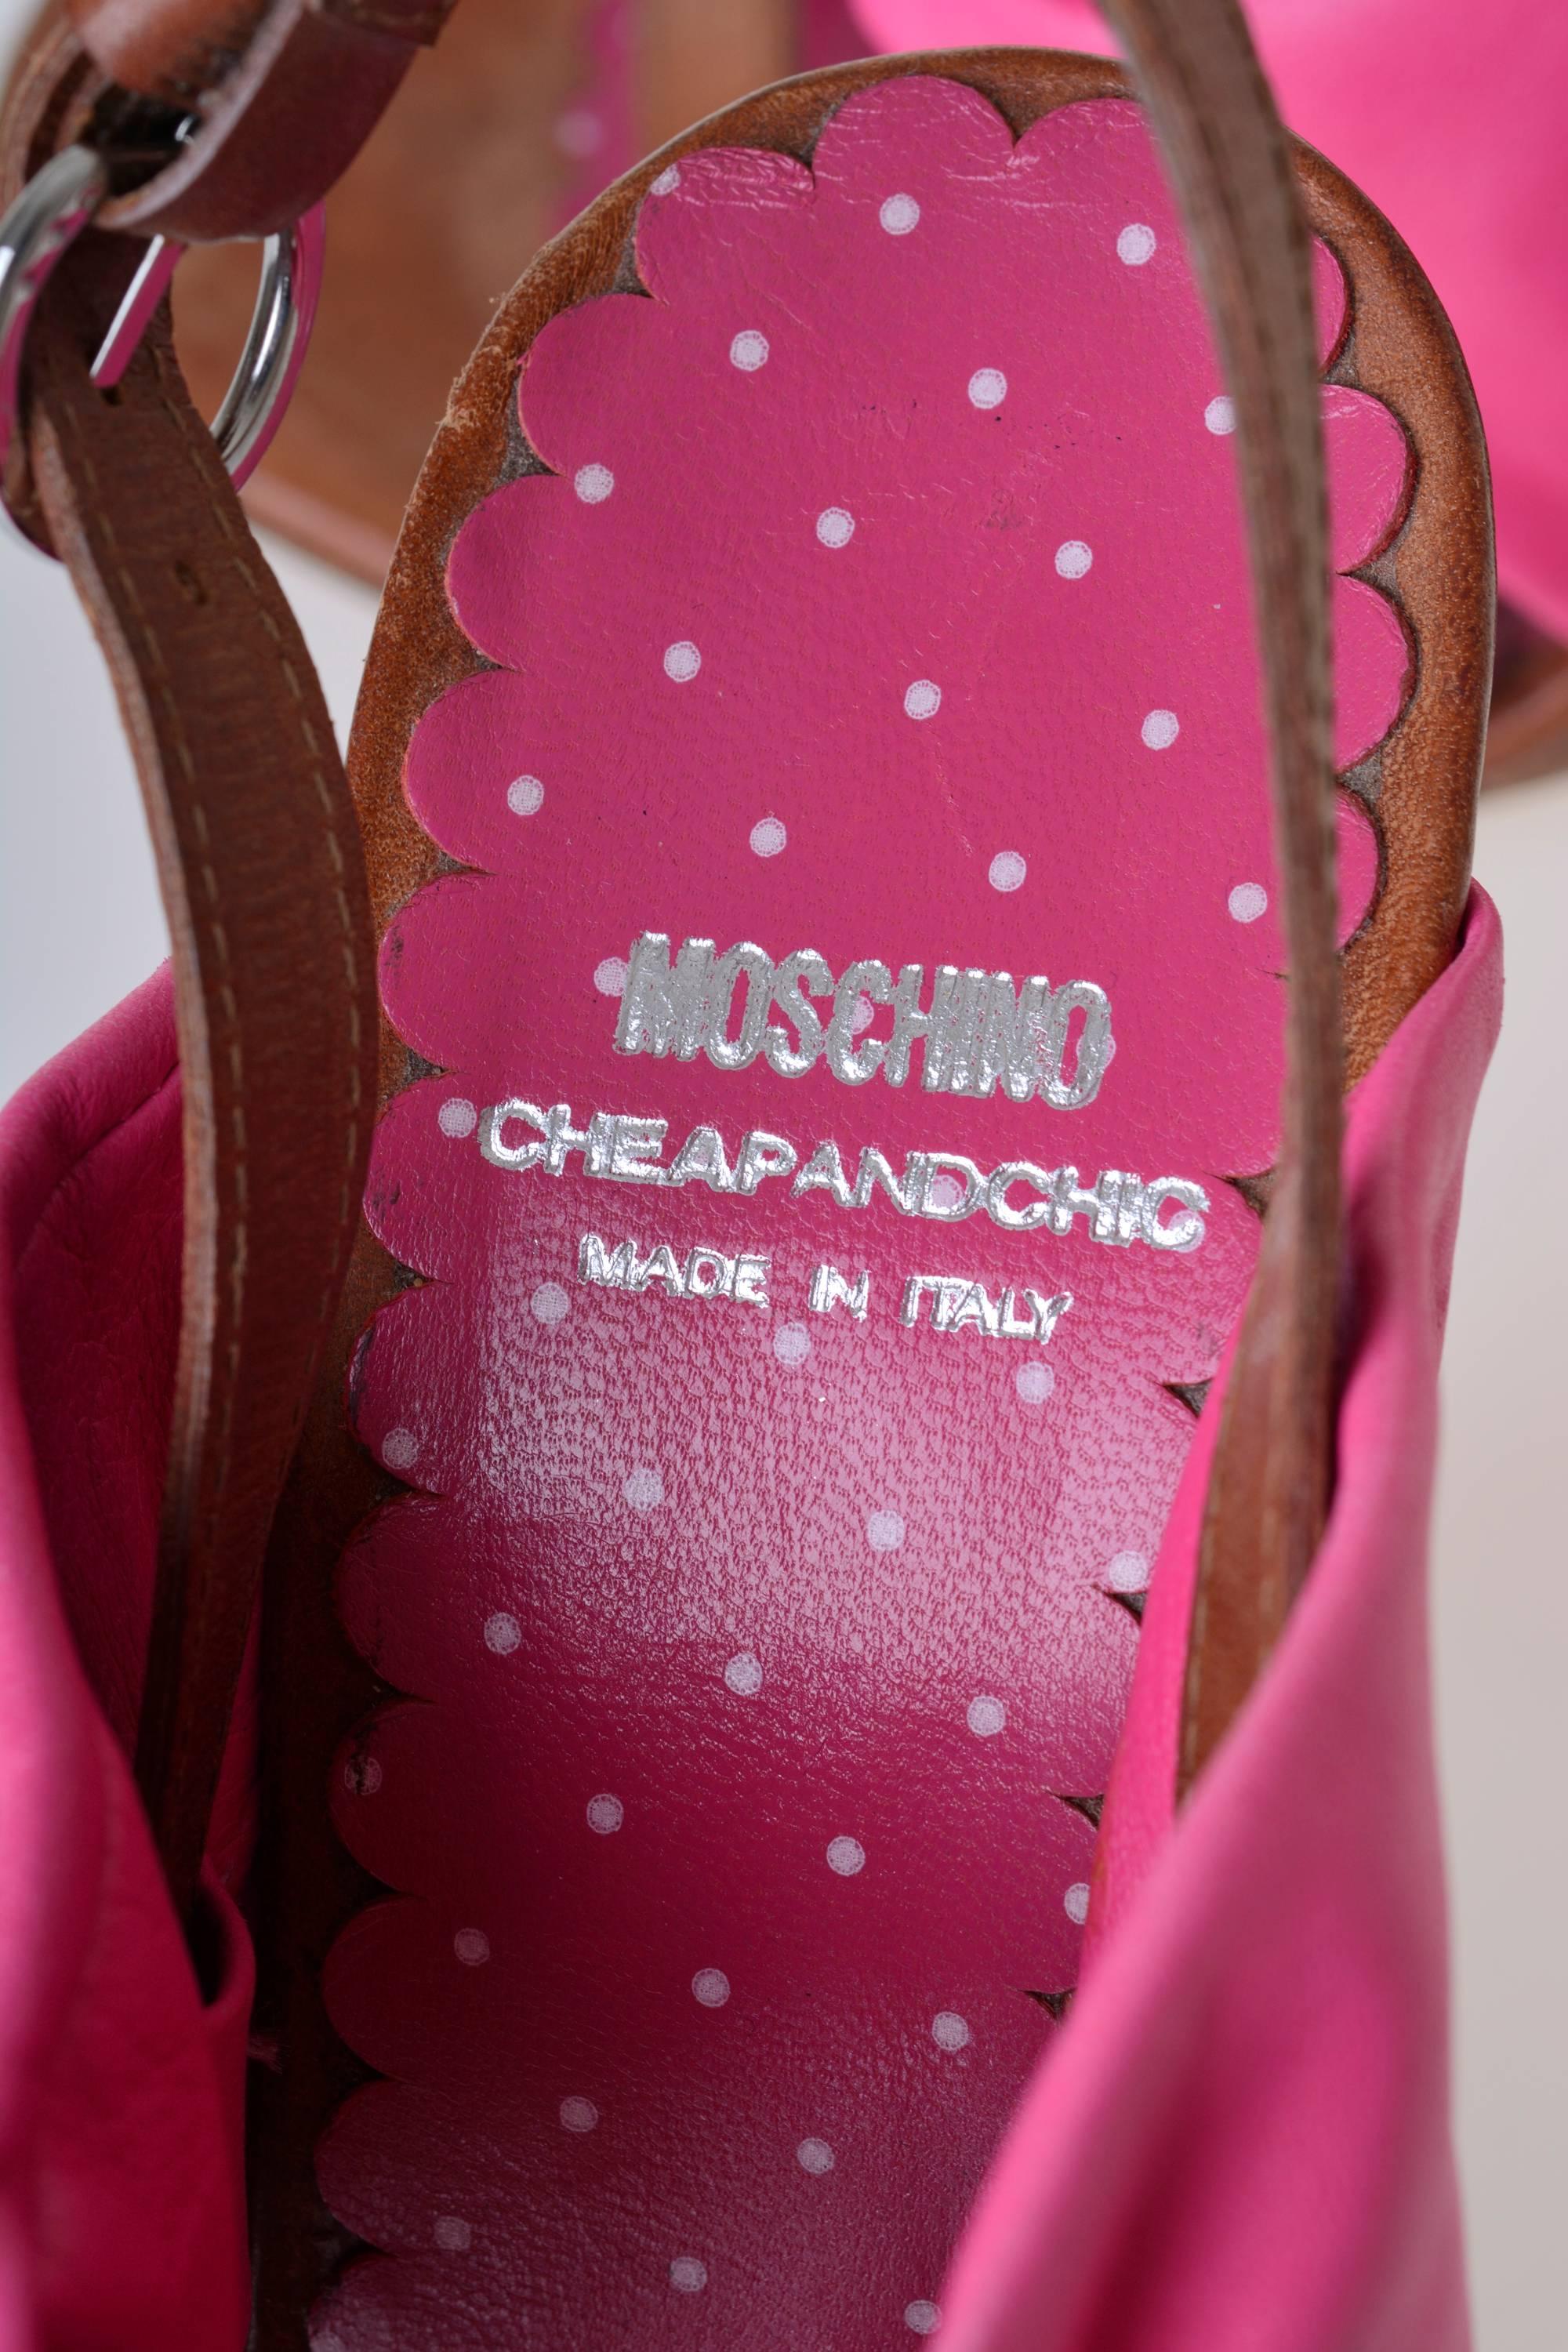 MOSCHINO Cheap & Chic Fuchsia Bow Wedge Sandals In Excellent Condition For Sale In Milan, Italy